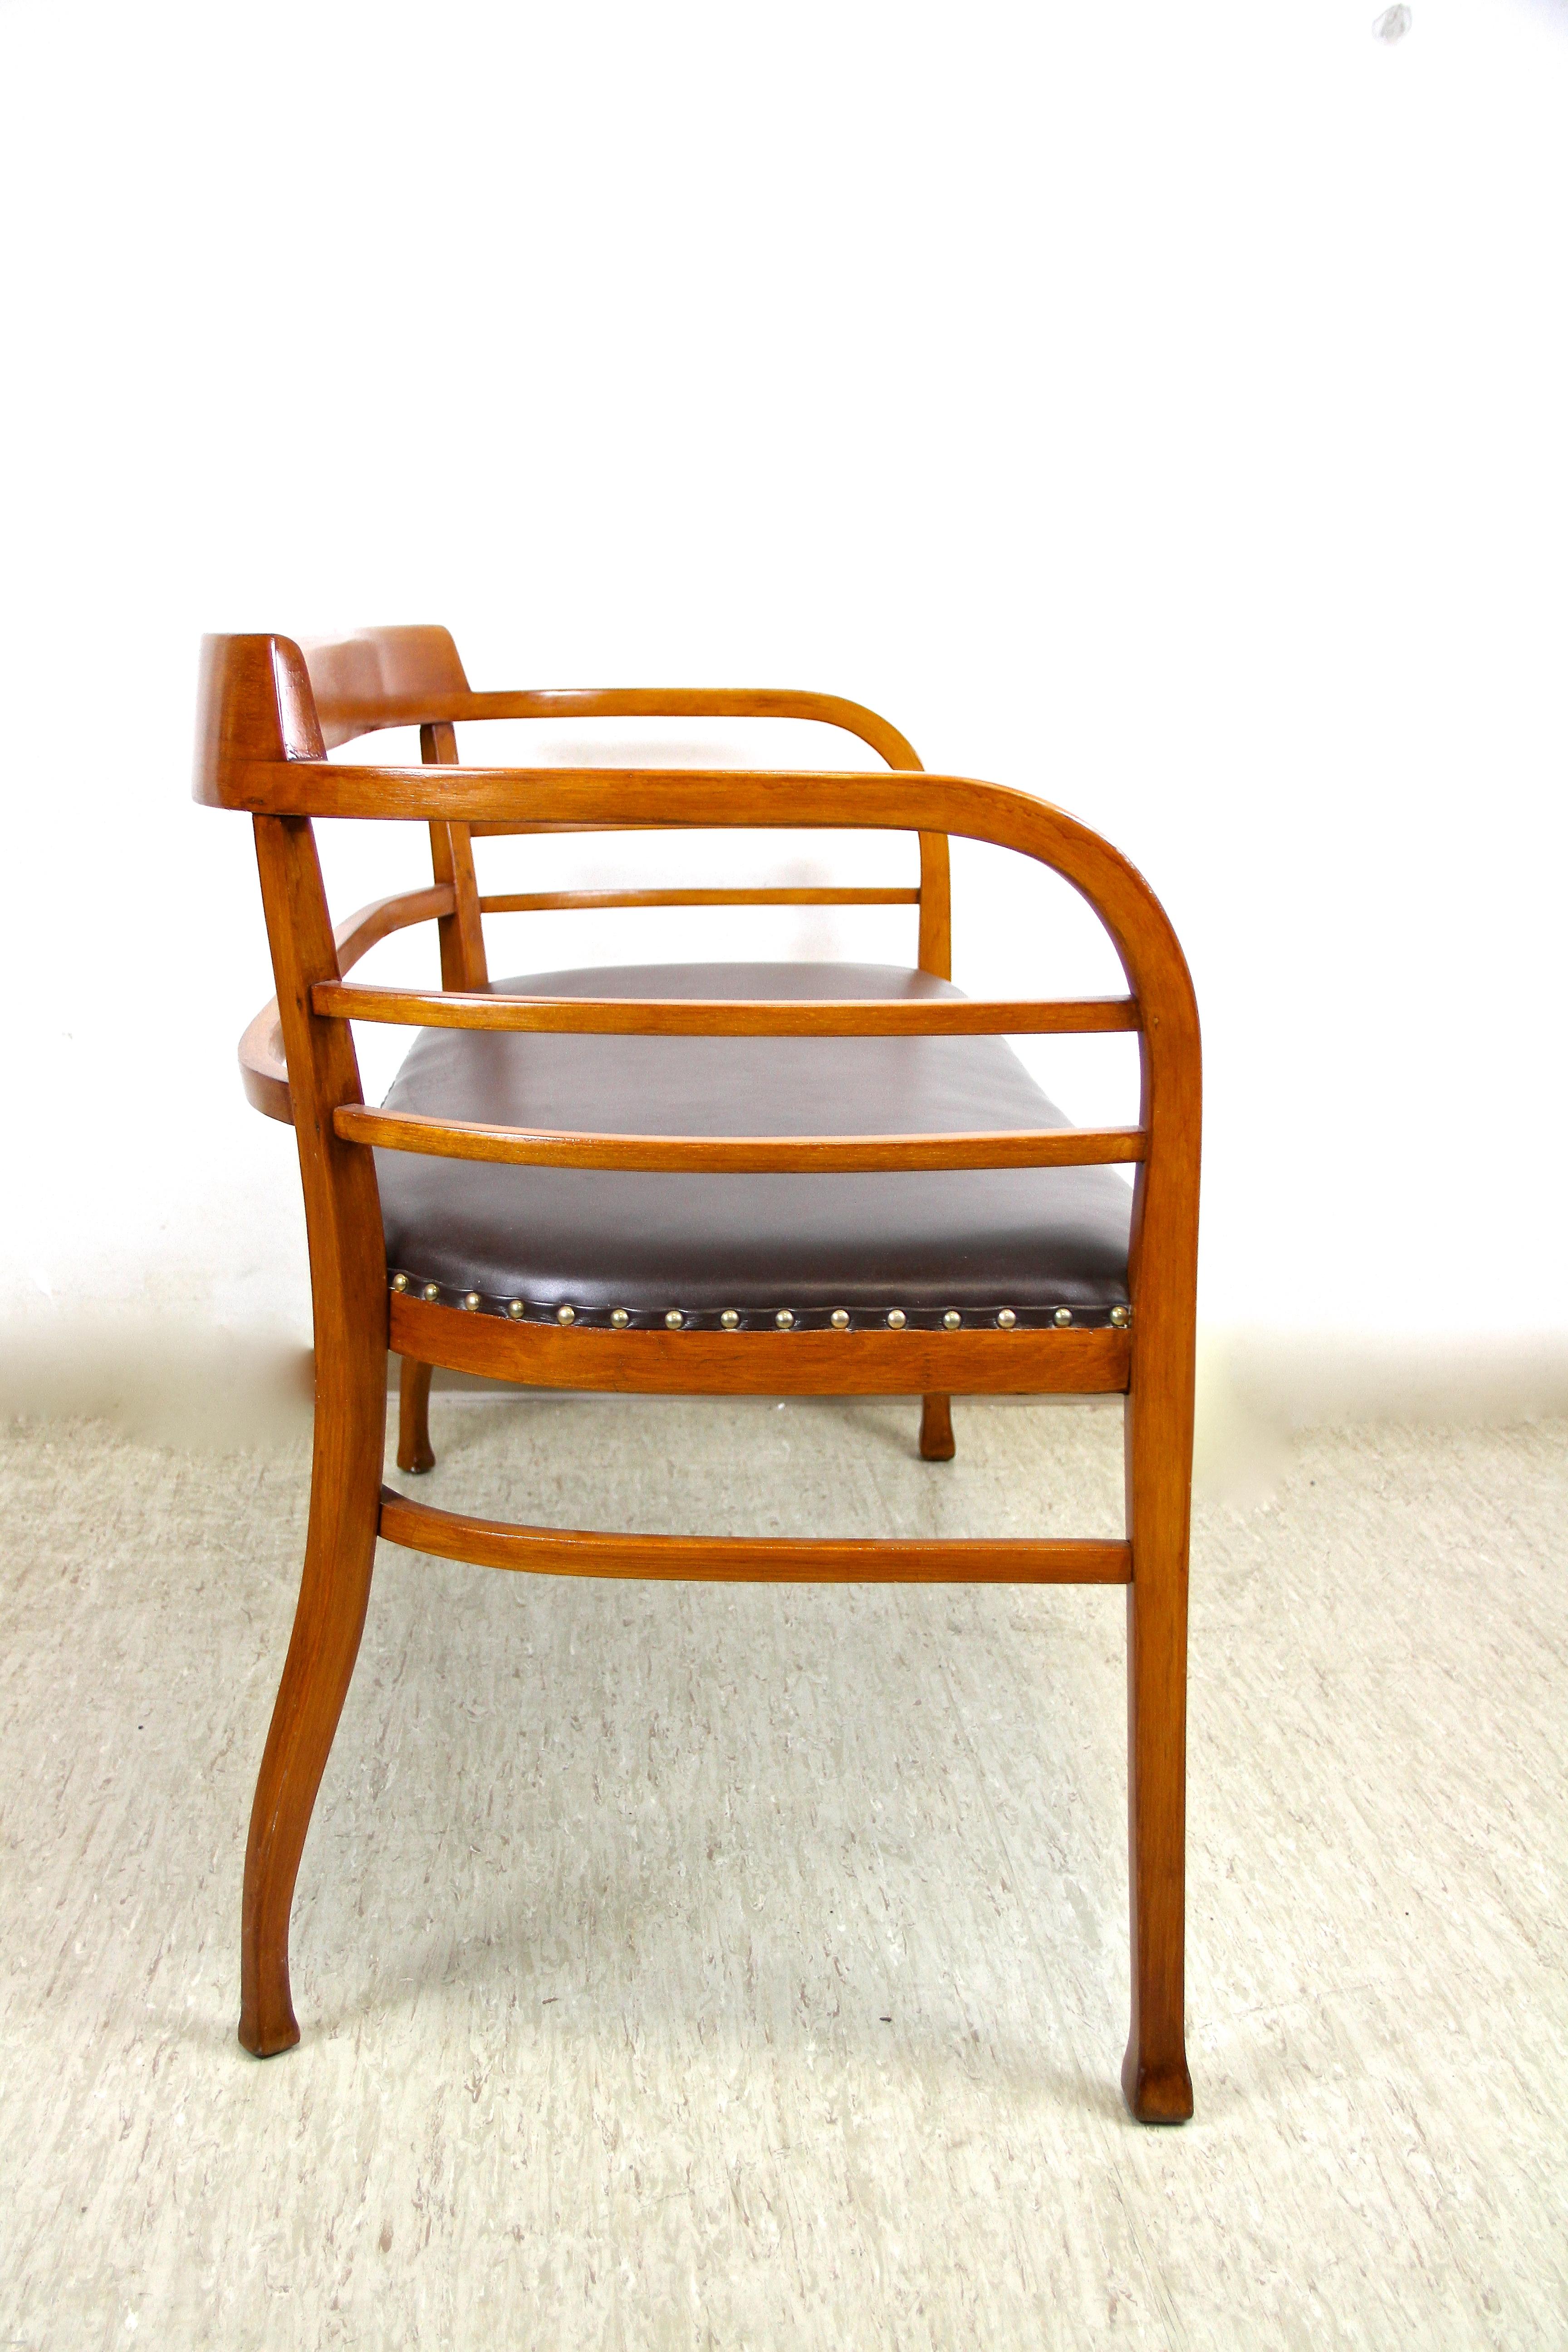 Austrian Thonet Bentwood Bench Attributed To Otto Wagner, Austria, circa 1905